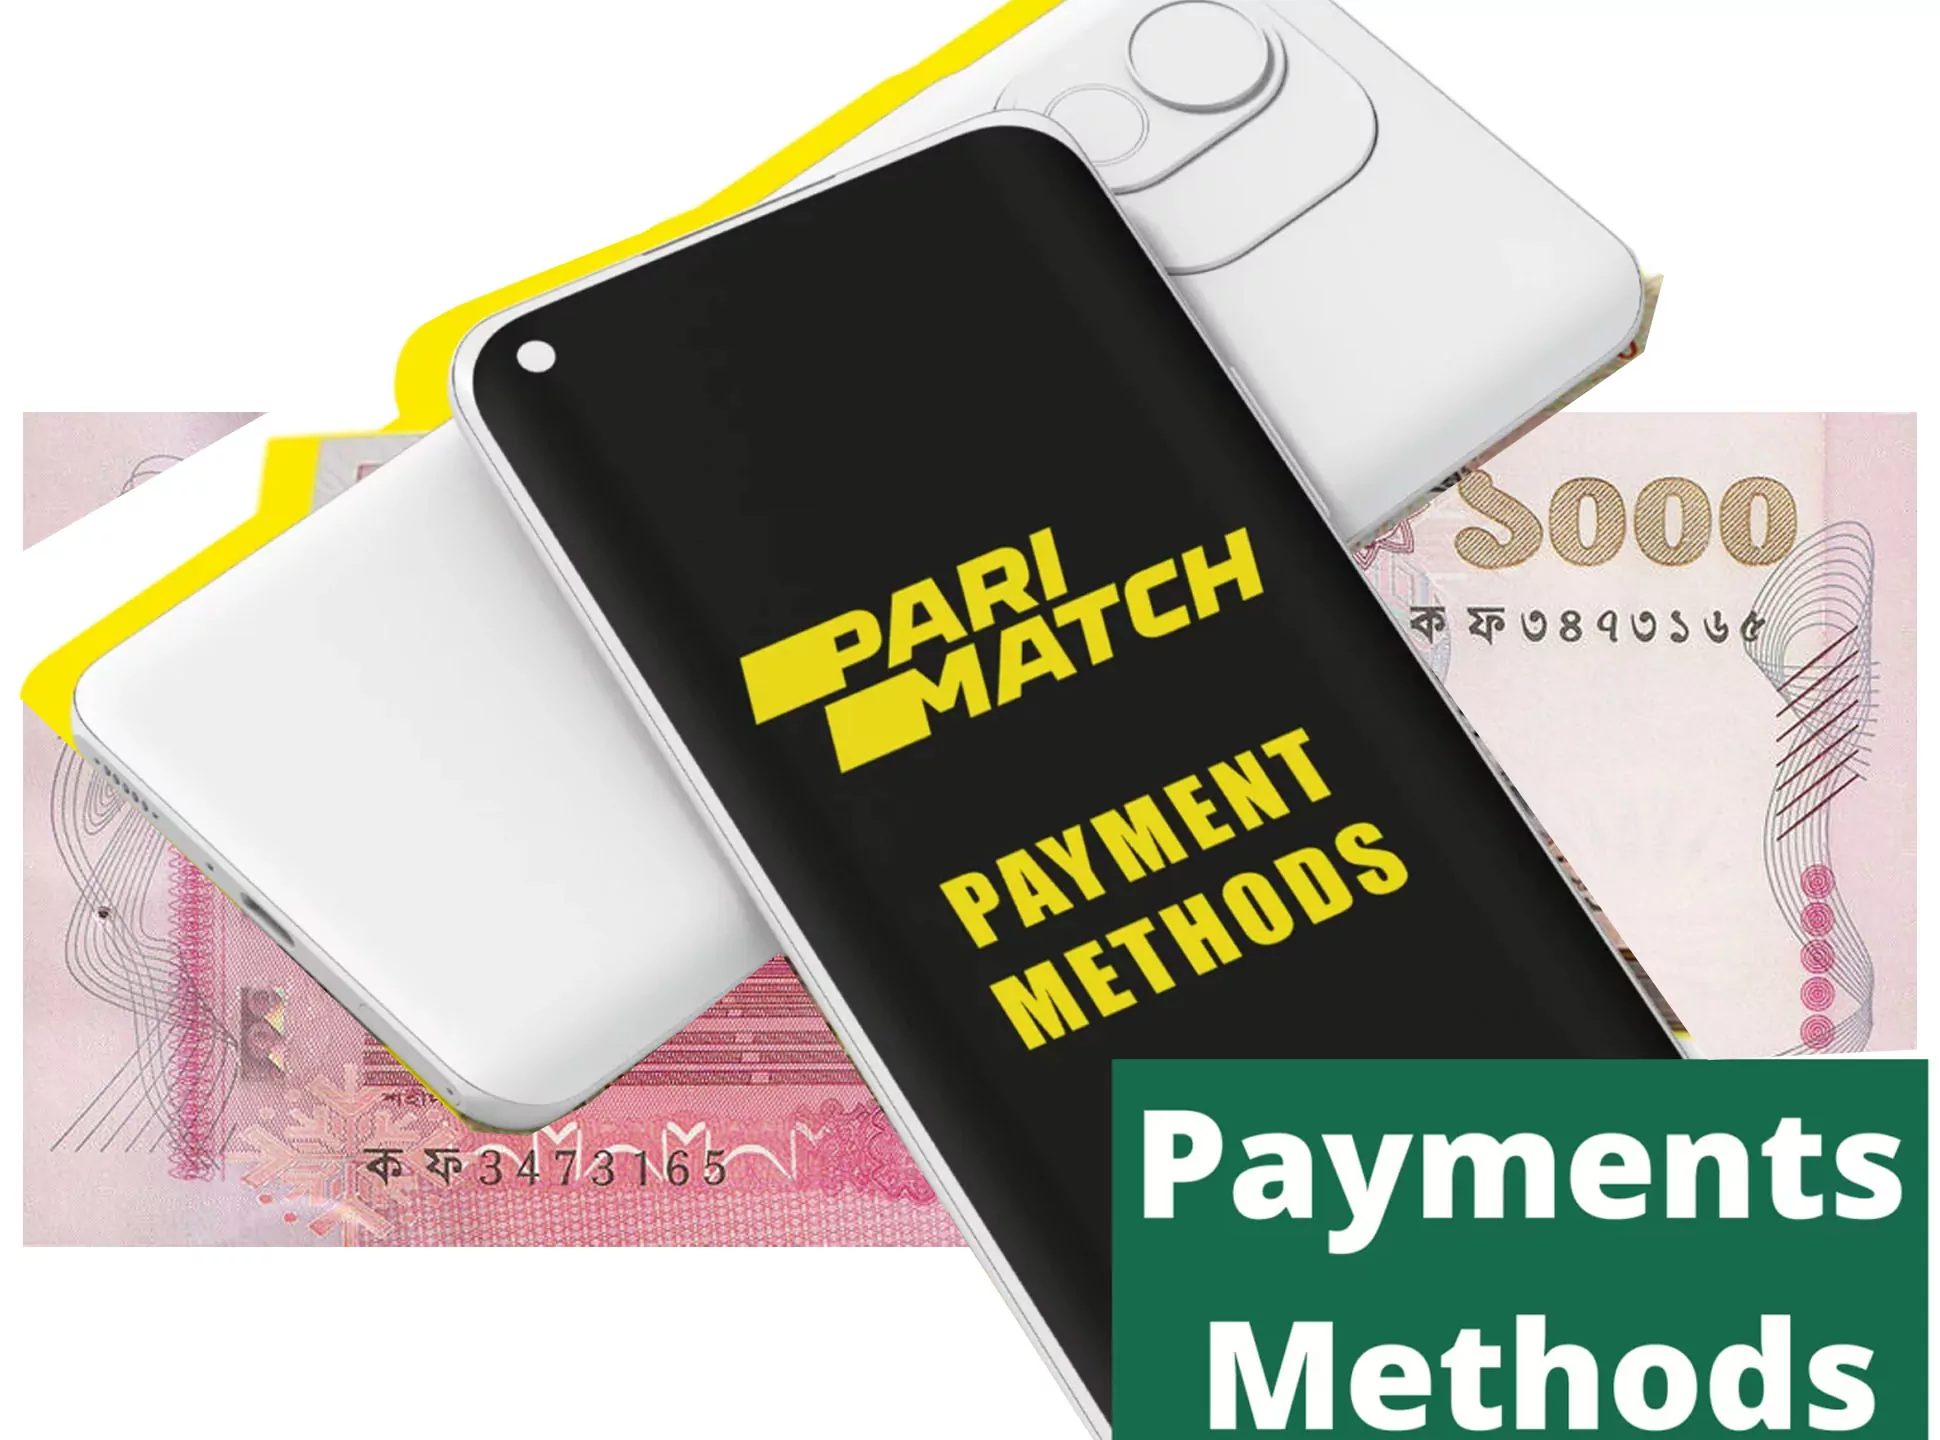 Use a wide range of payment methods in the parimatch application.